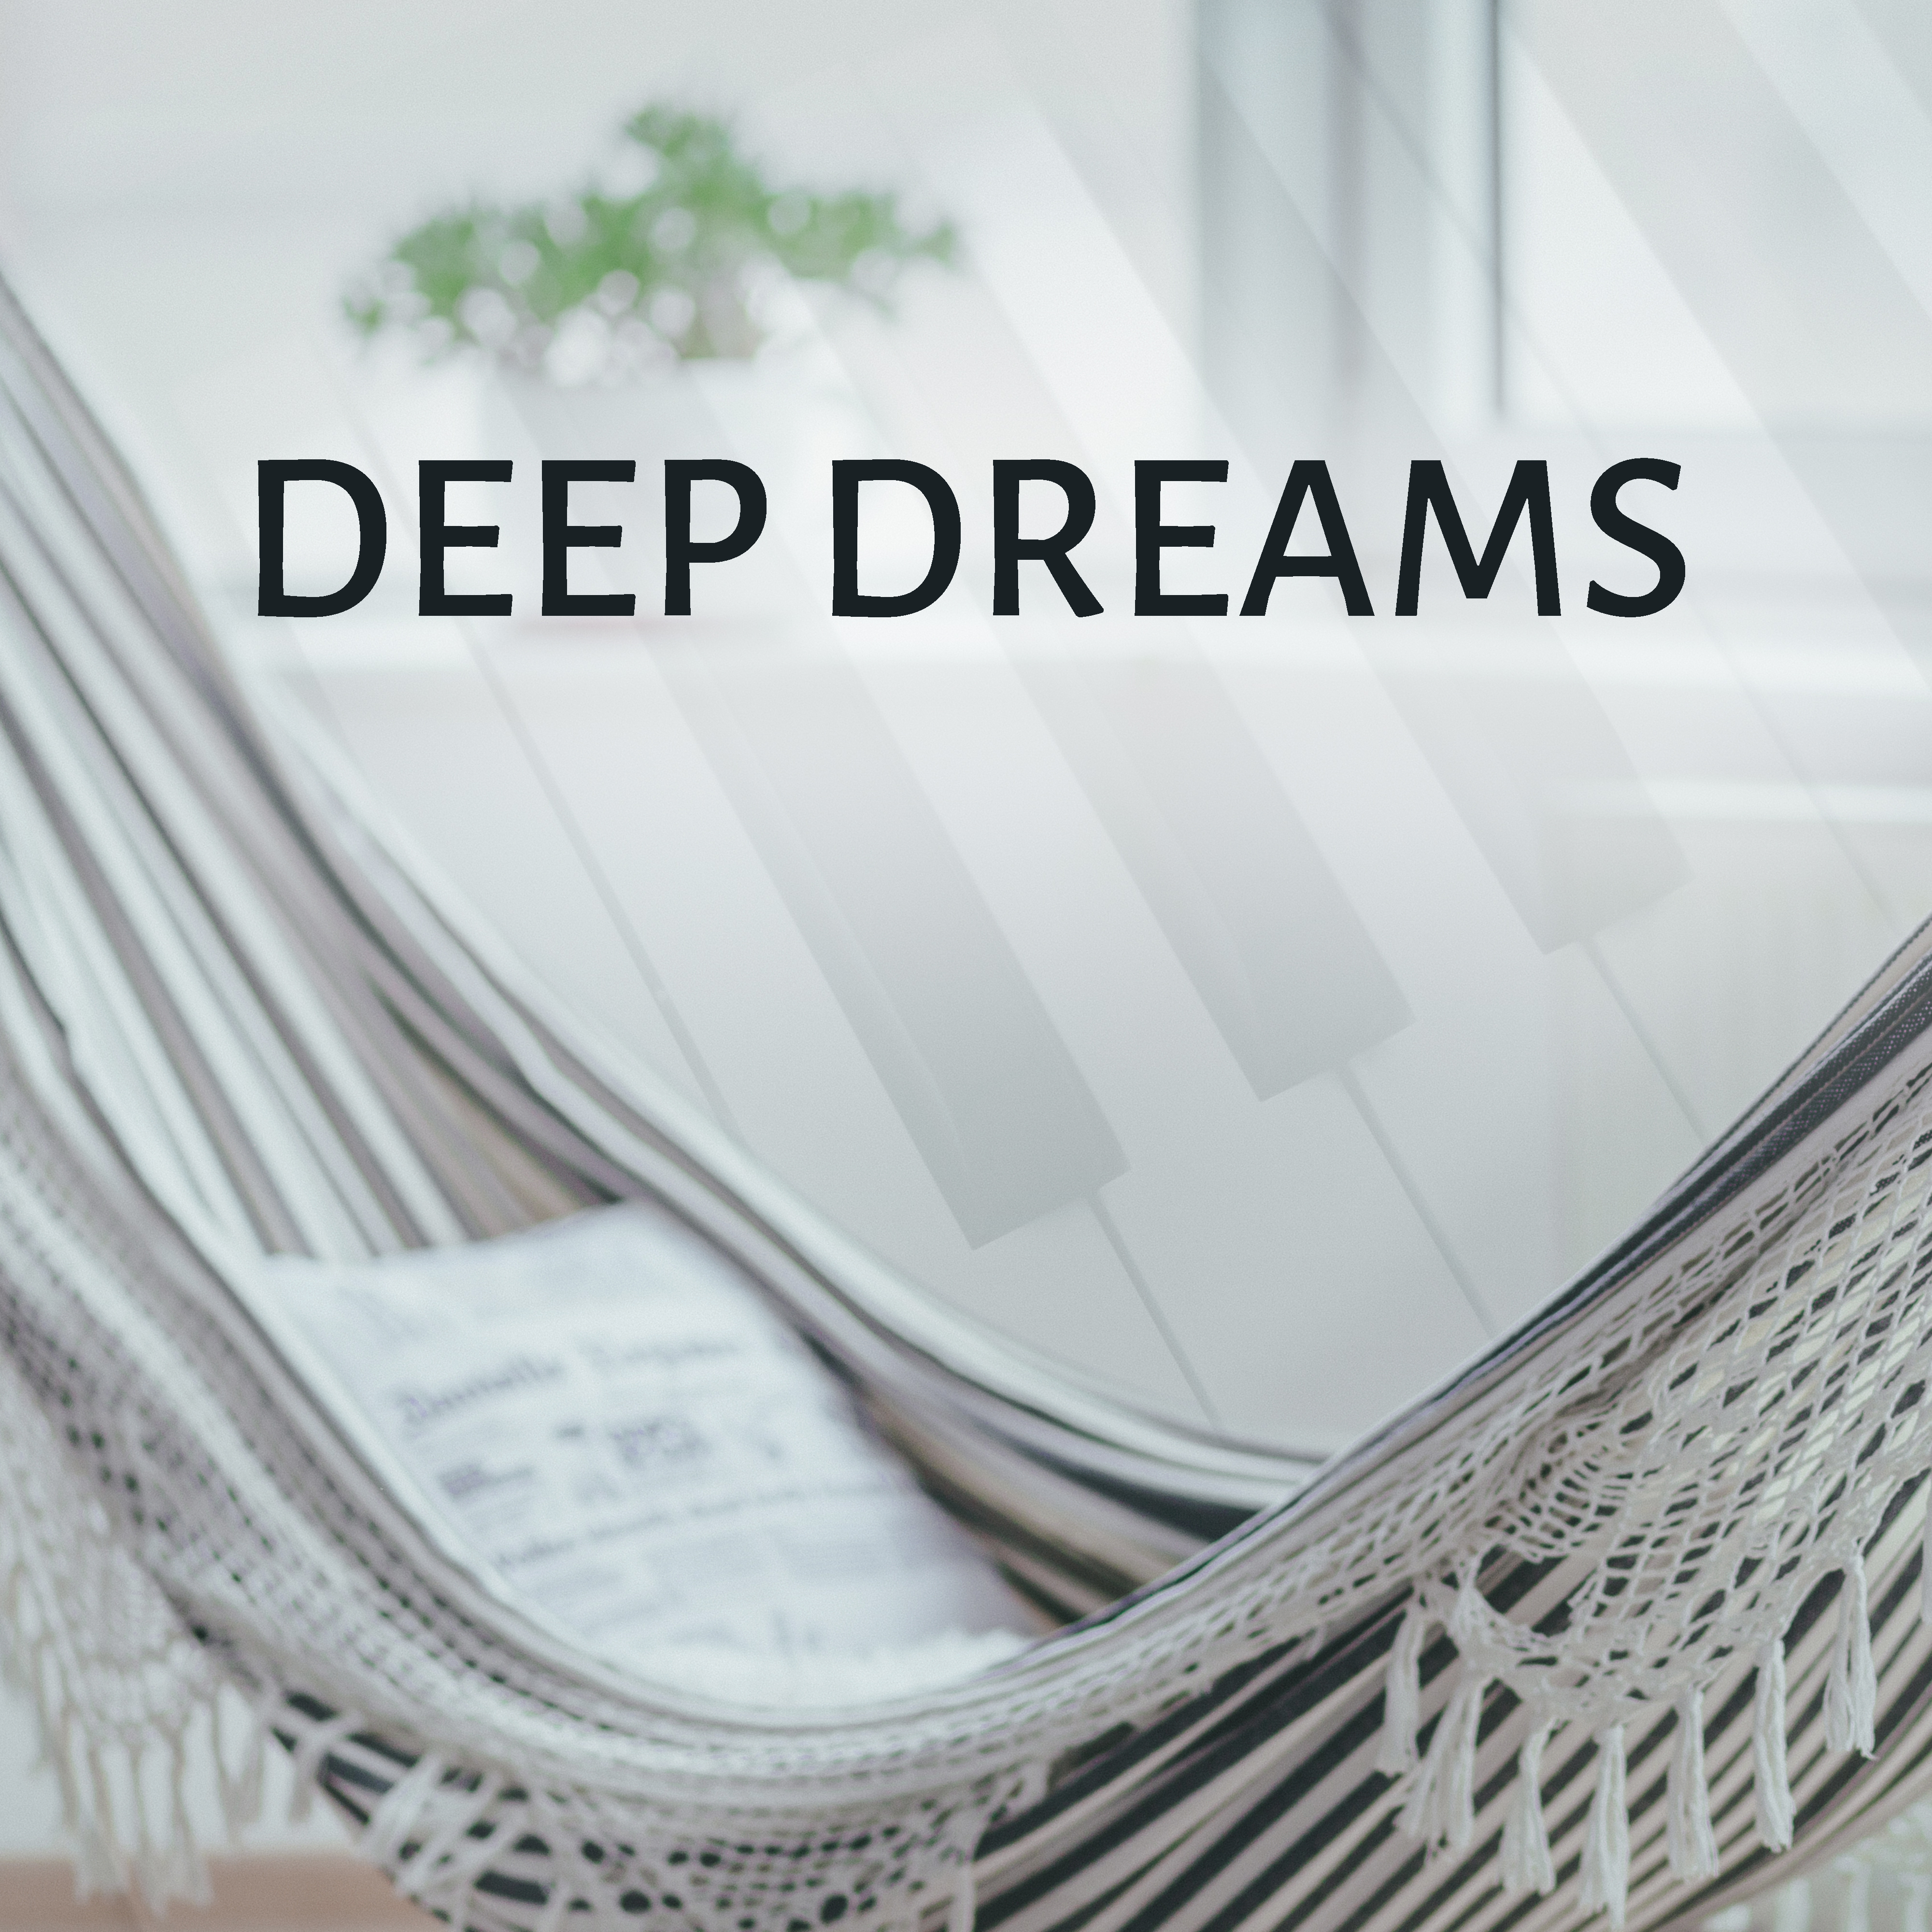 Deep Dreams  Soothing Jazz for Sleep, Tranquility, Pure Relaxation, Sweet Dreams, Gentle Piano, Restful Sleep